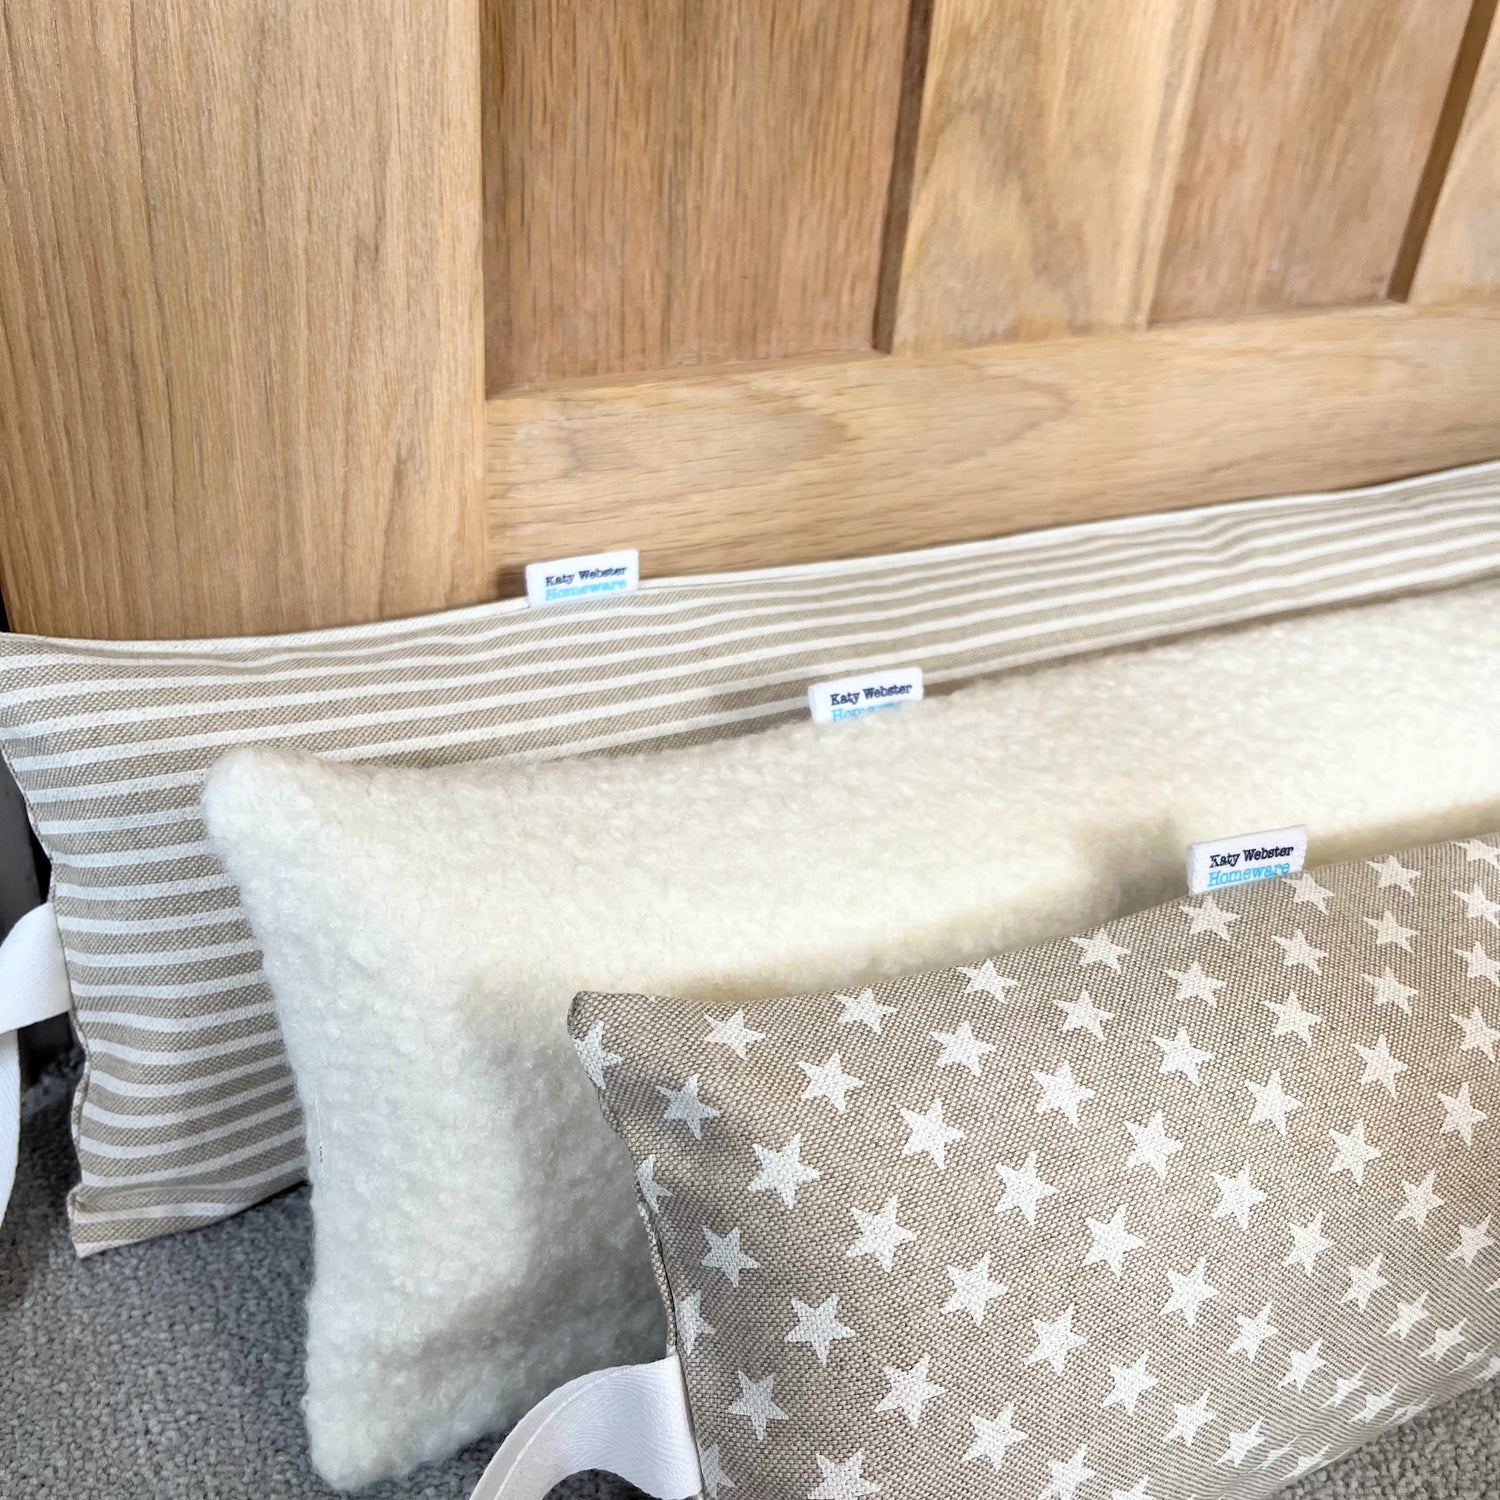 Draft Excluders against a door made with white star print, boucle and ticking stripe fabric.